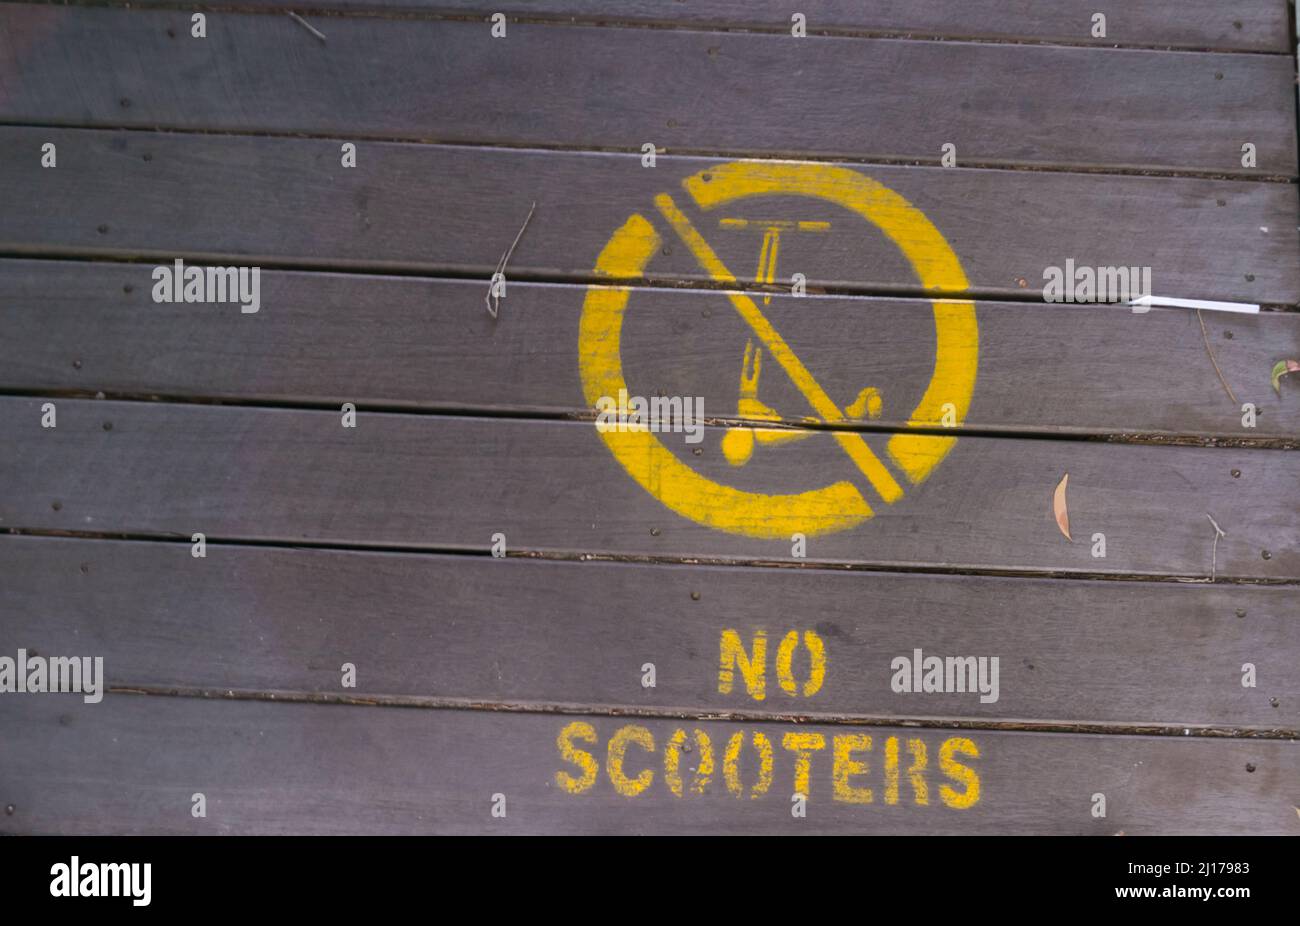 No scooters sign on wooden pathway in city Stock Photo